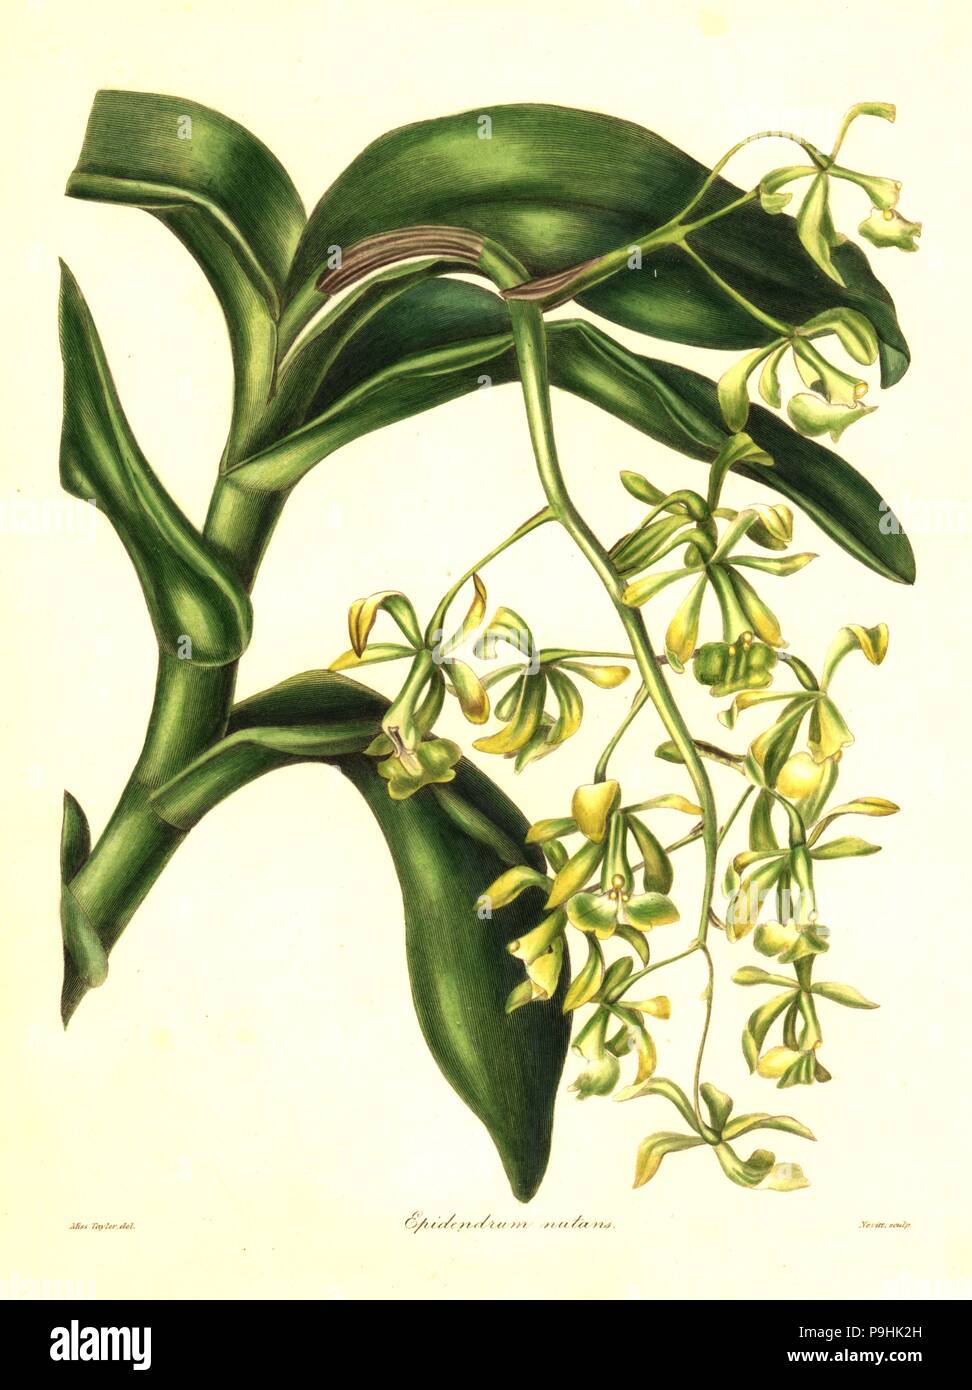 Nodding epidendrum orchid, Epidendrum nutans. Handcoloured copperplate engraving by S. Nevitt after a botanical illustration by Miss Jane Taylor from Benjamin Maund and the Rev. John Stevens Henslow's The Botanist, London, 1836. Stock Photo